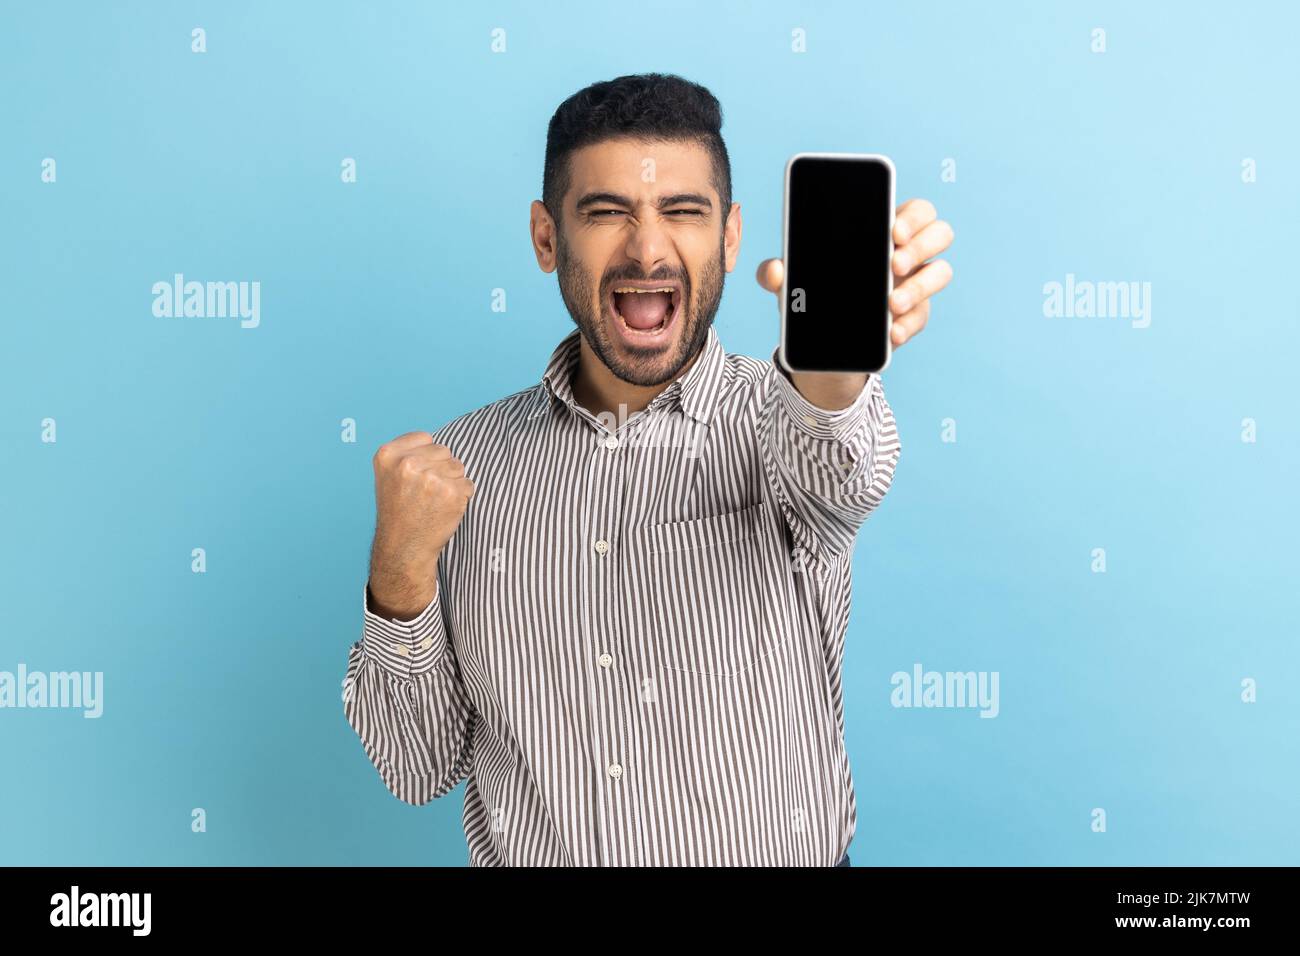 Happy businessman with beard holding smartphone and smiling making yes gesture, celebrating online lottery or giveaway victory, wearing striped shirt. Indoor studio shot isolated on blue background. Stock Photo